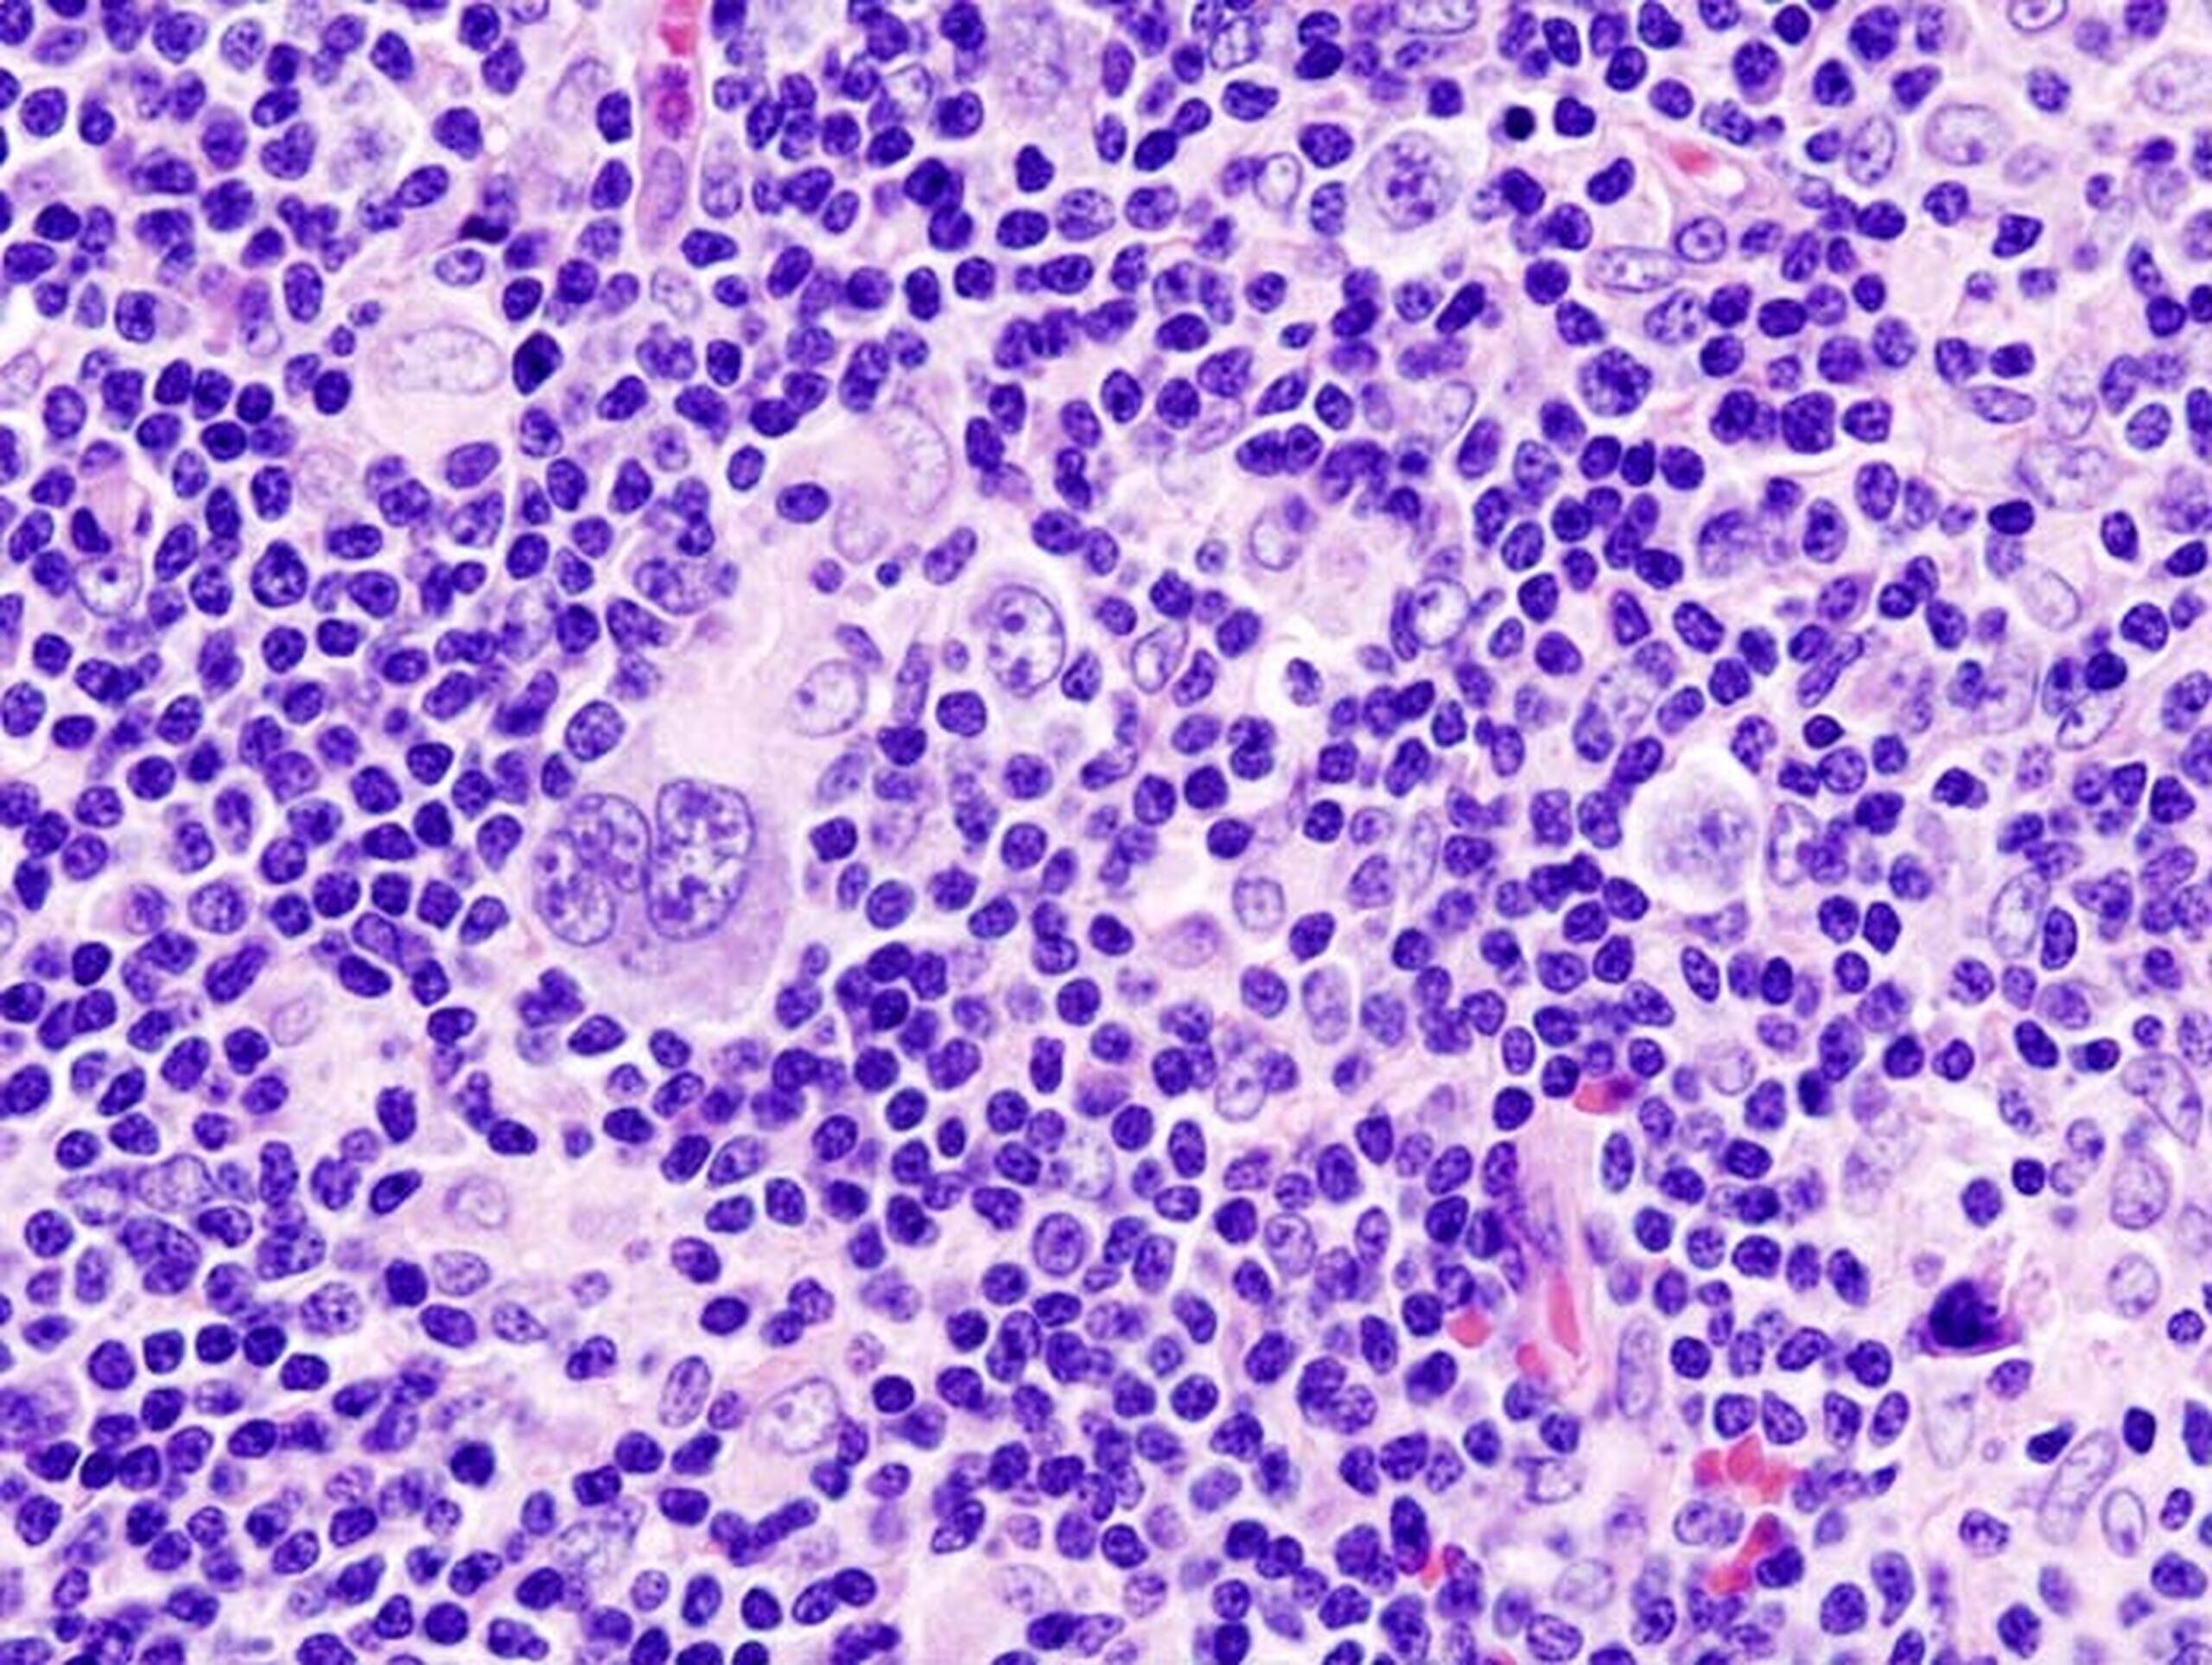 Why Hodgkins Lymphoma Cells Grow Uncontrollably